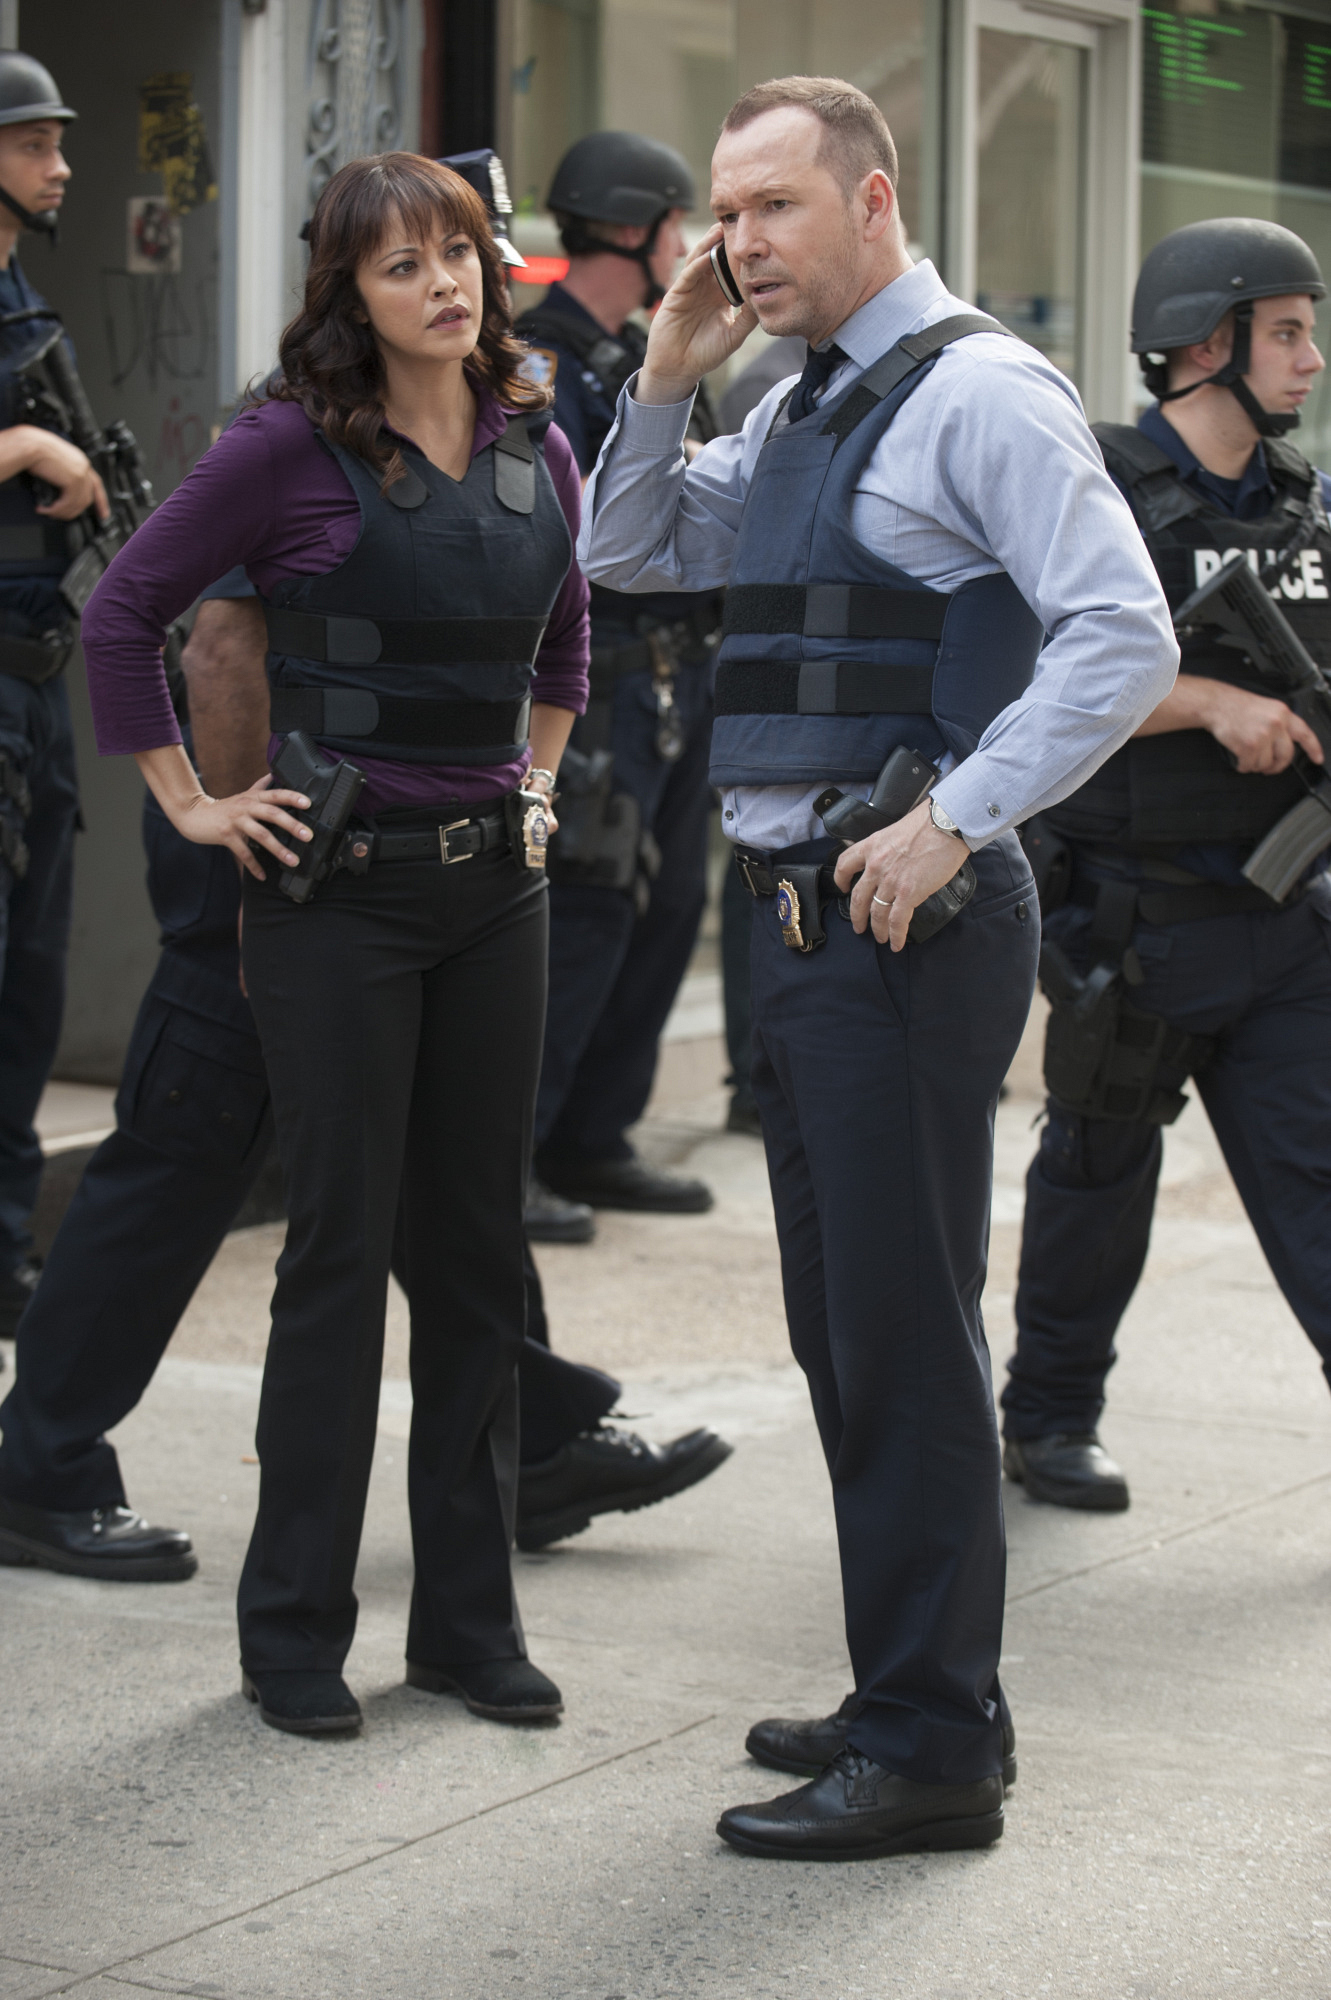 First Look: Danny's Past Resurfaces On Blue Bloods - Page 3 - Blue Bloods Photos - CBS.com1331 x 2000